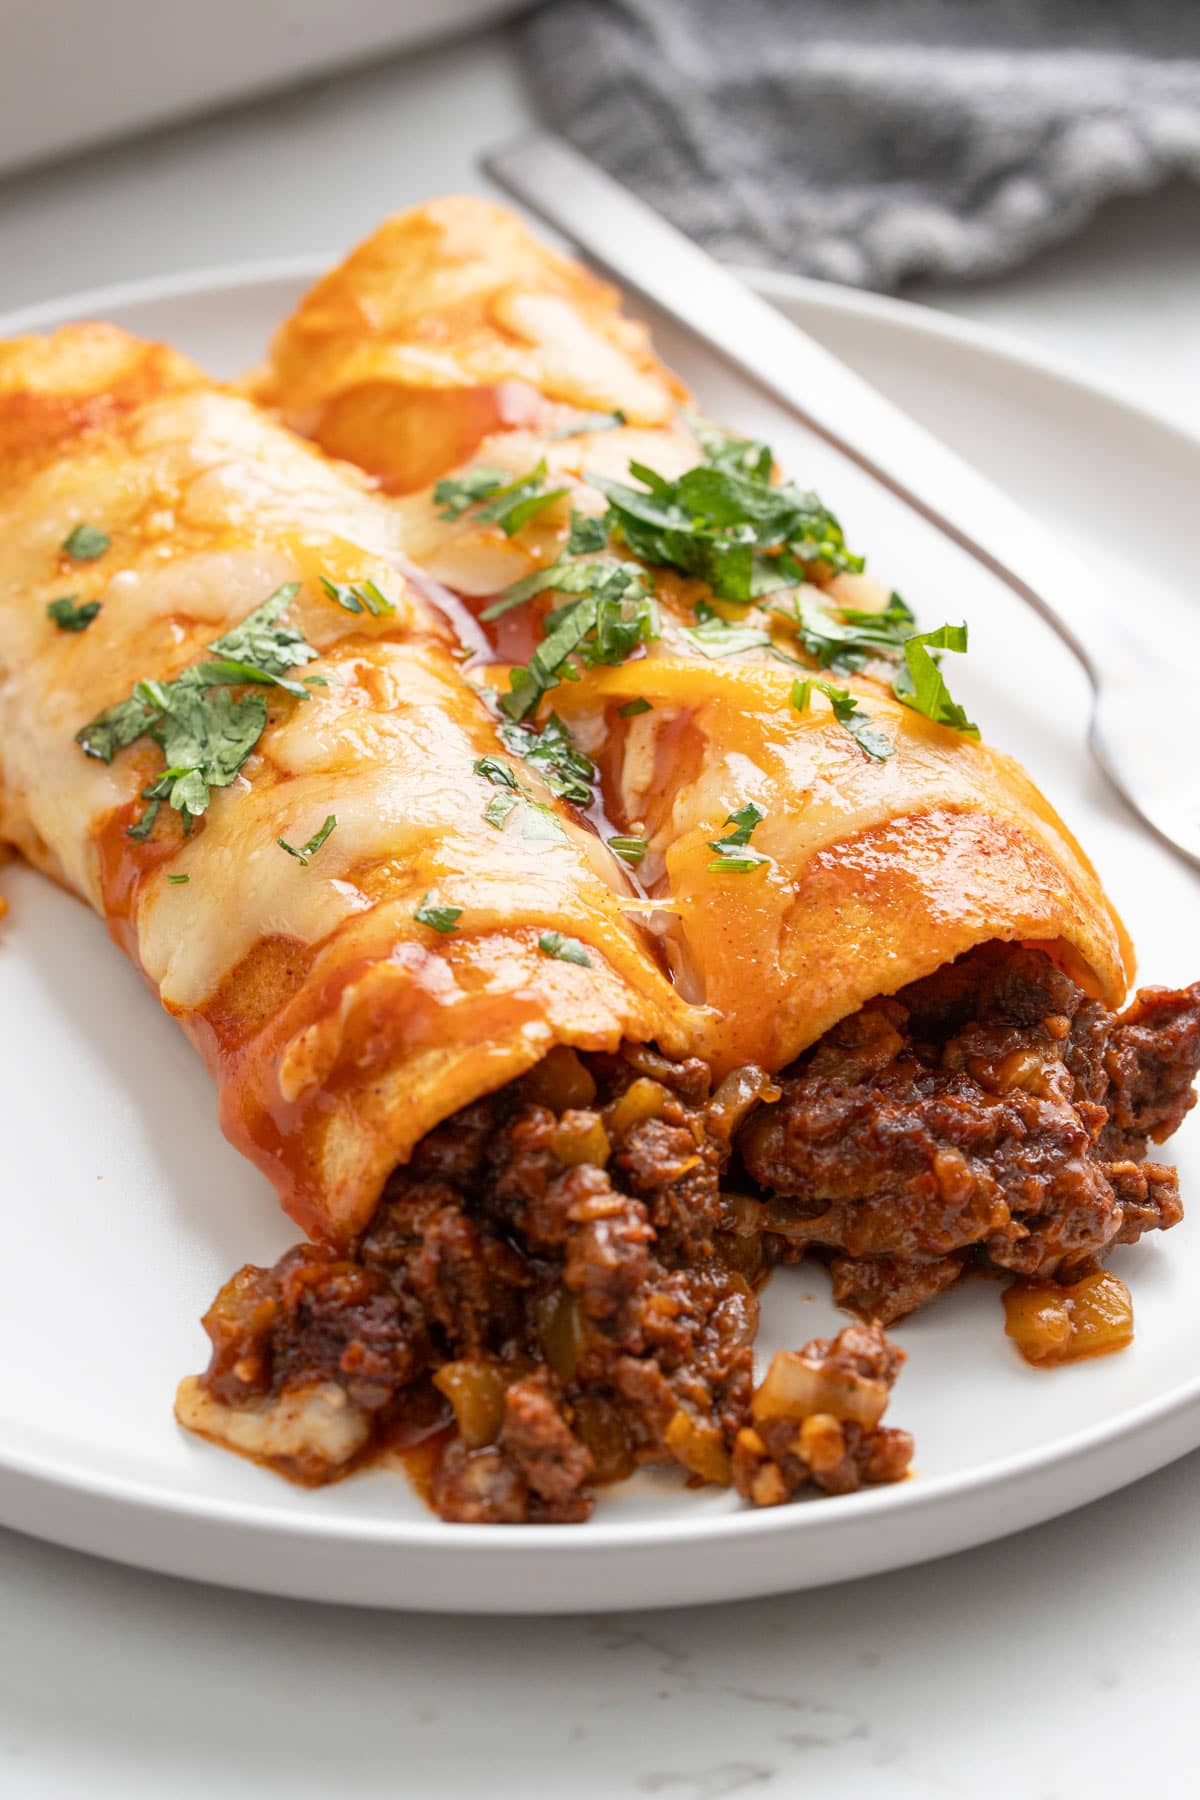 Two ground beef enchiladas on a white plate topped with enchilada sauce, melted cheese and chopped fresh parsley.